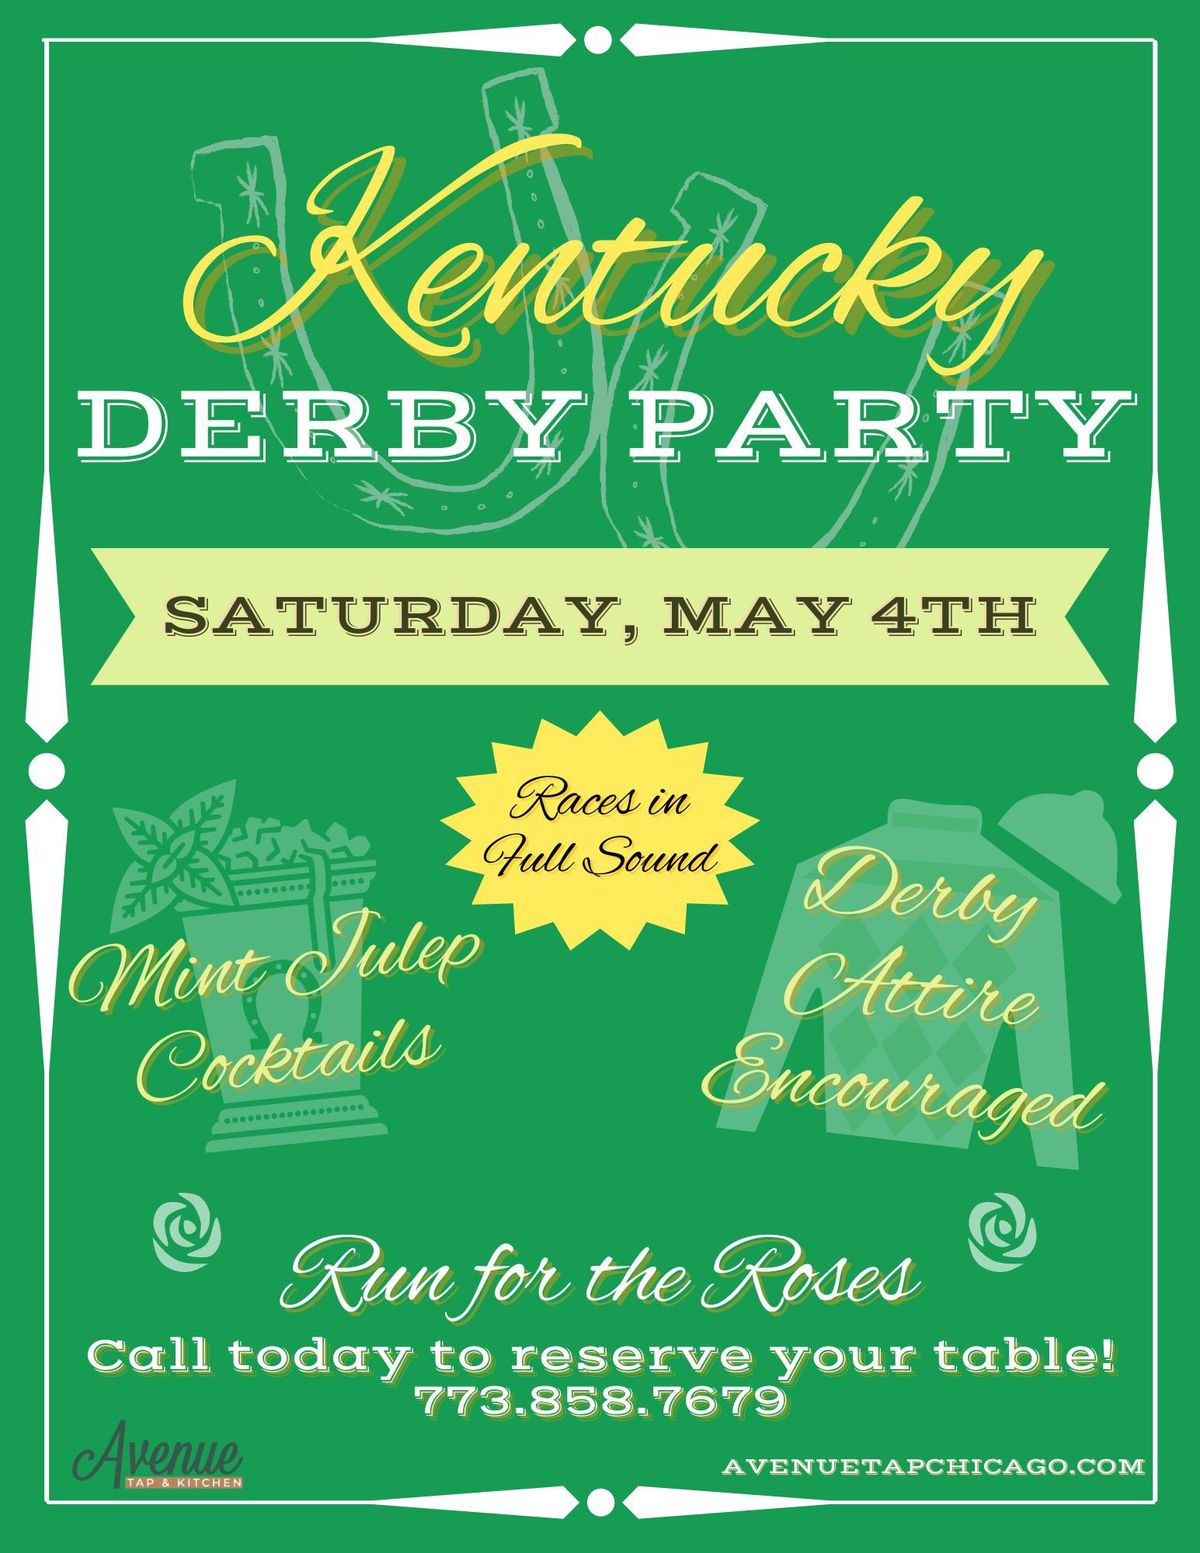 Derby Day at Avenue!